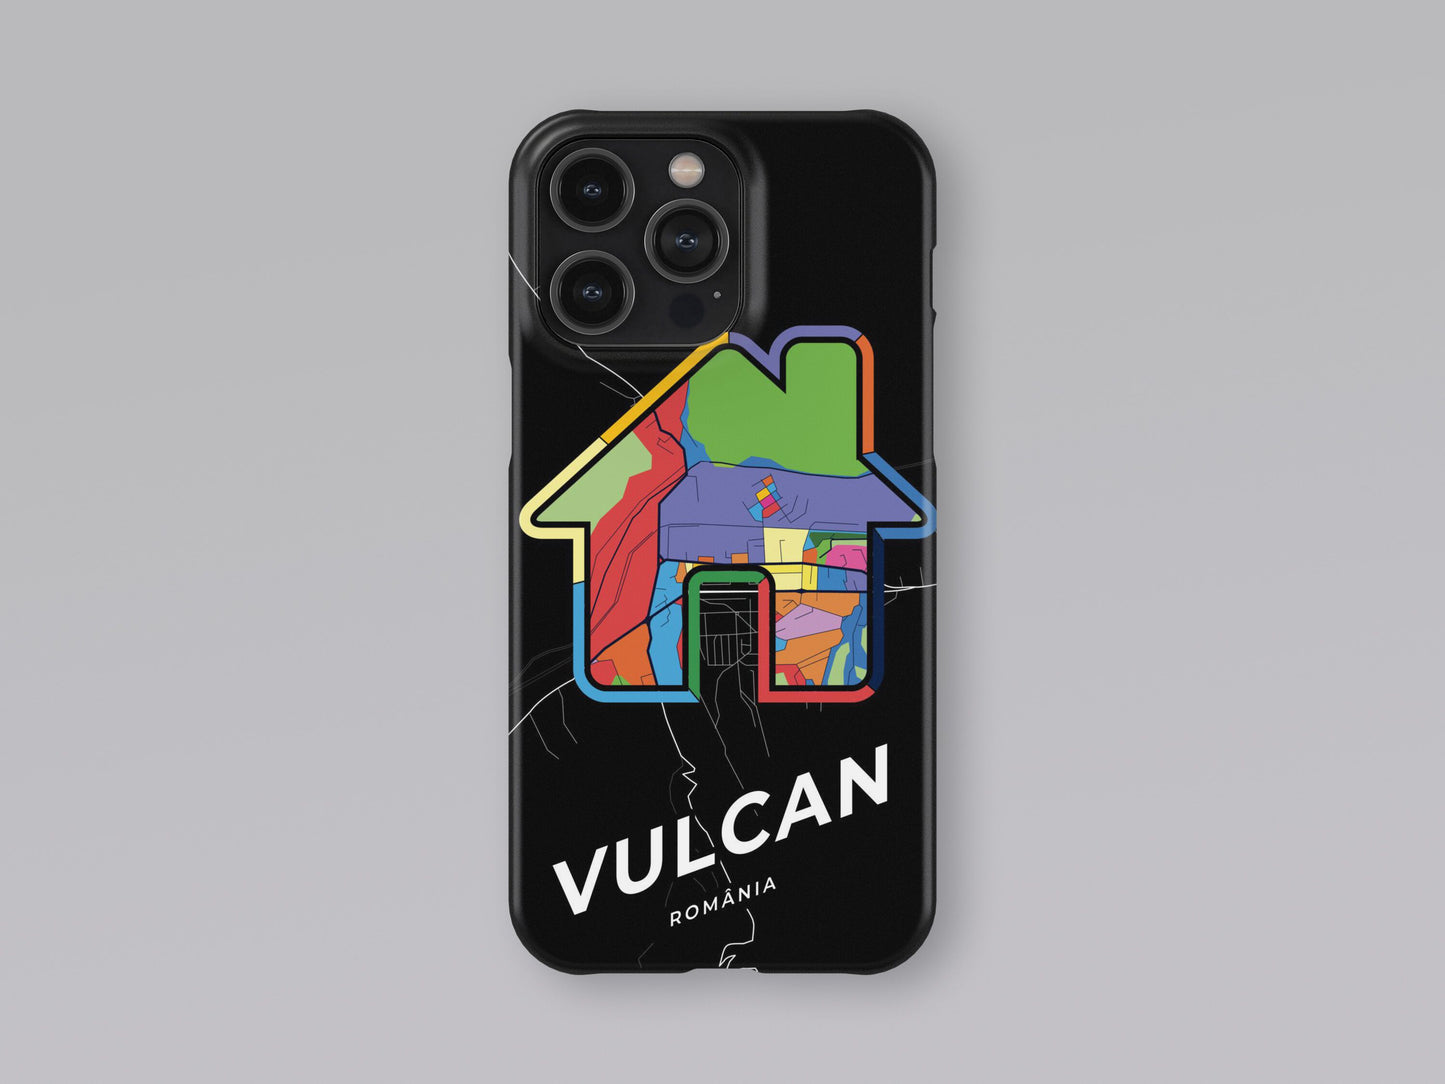 Vulcan Romania slim phone case with colorful icon 3